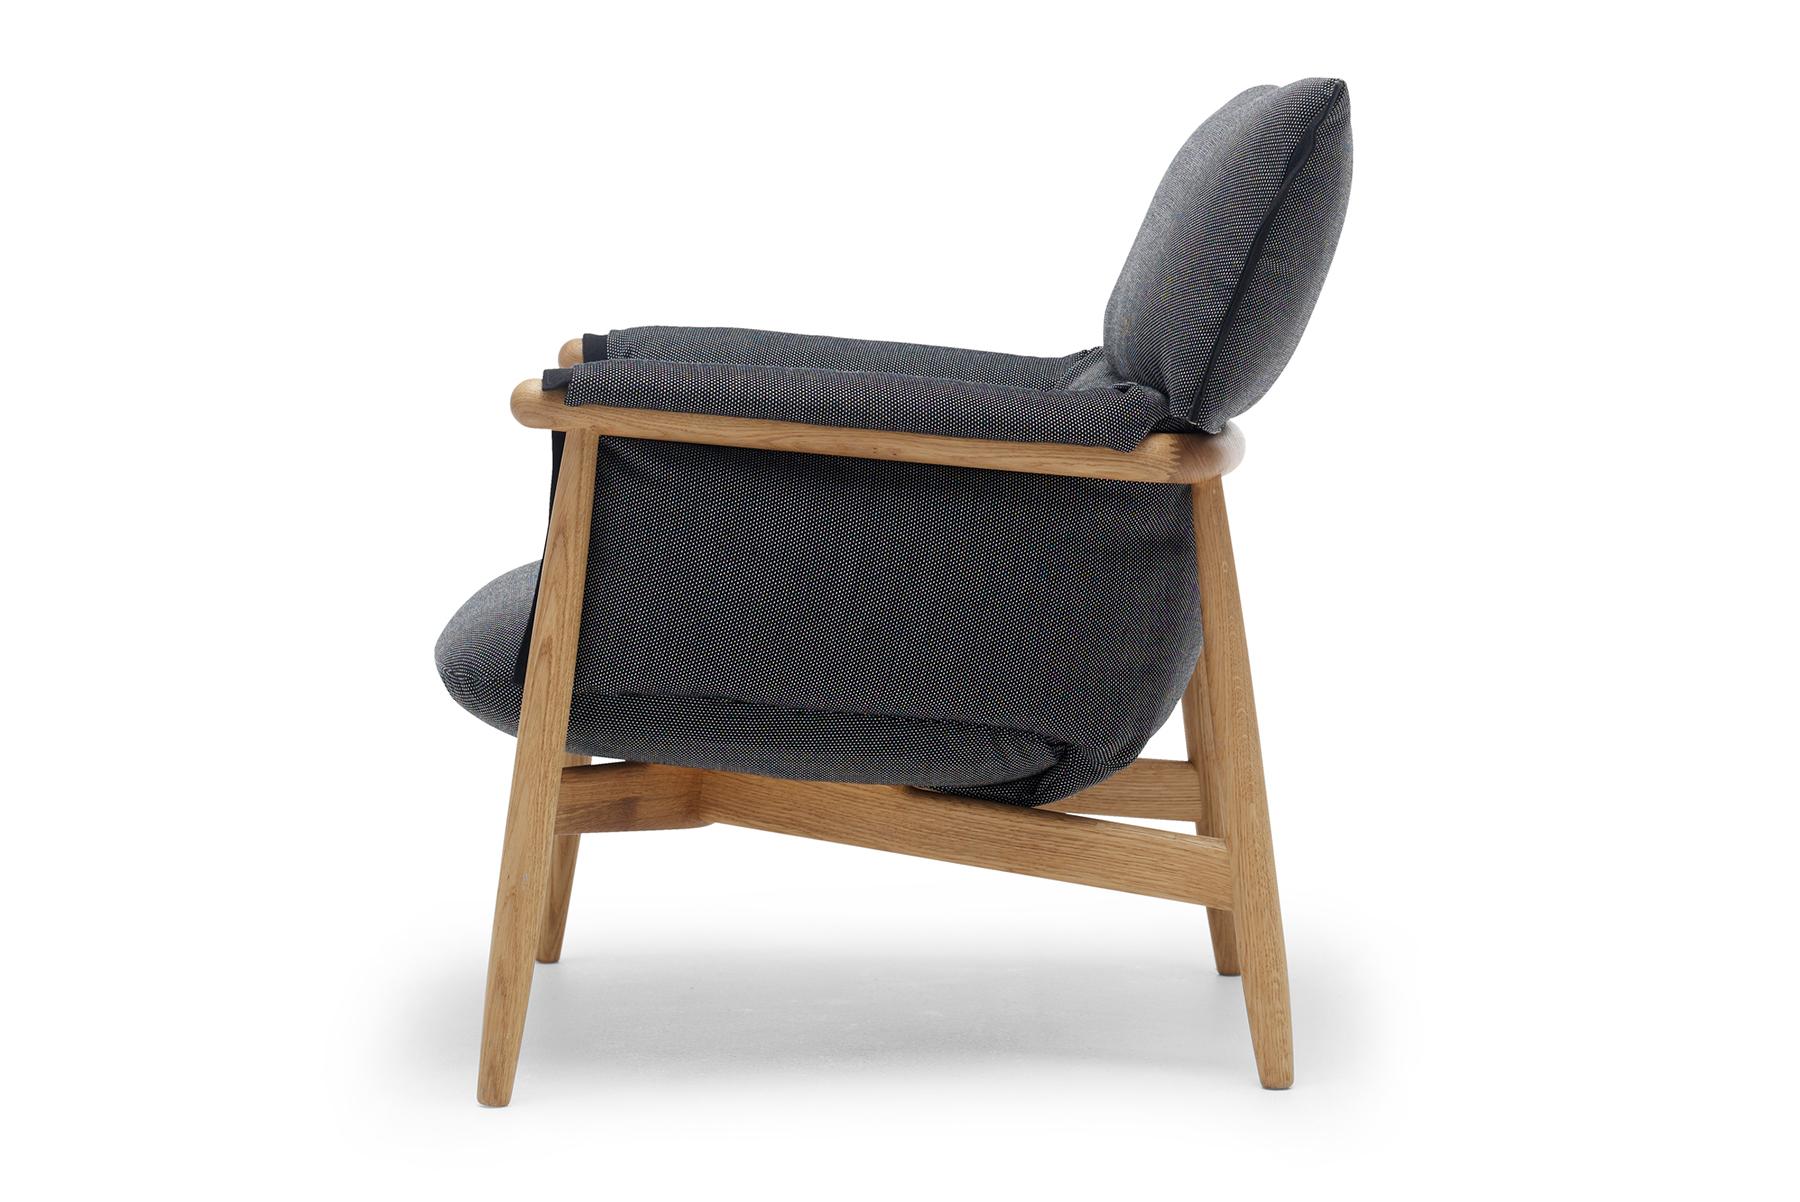 The E015 Embrace lounge chair was designed by EOOS for Carl Hansen & Søn in 2016. Made for relaxation, its soft cushions create added comfort. The Embrace lounge chair is part of the luxurious Embrace series.
  